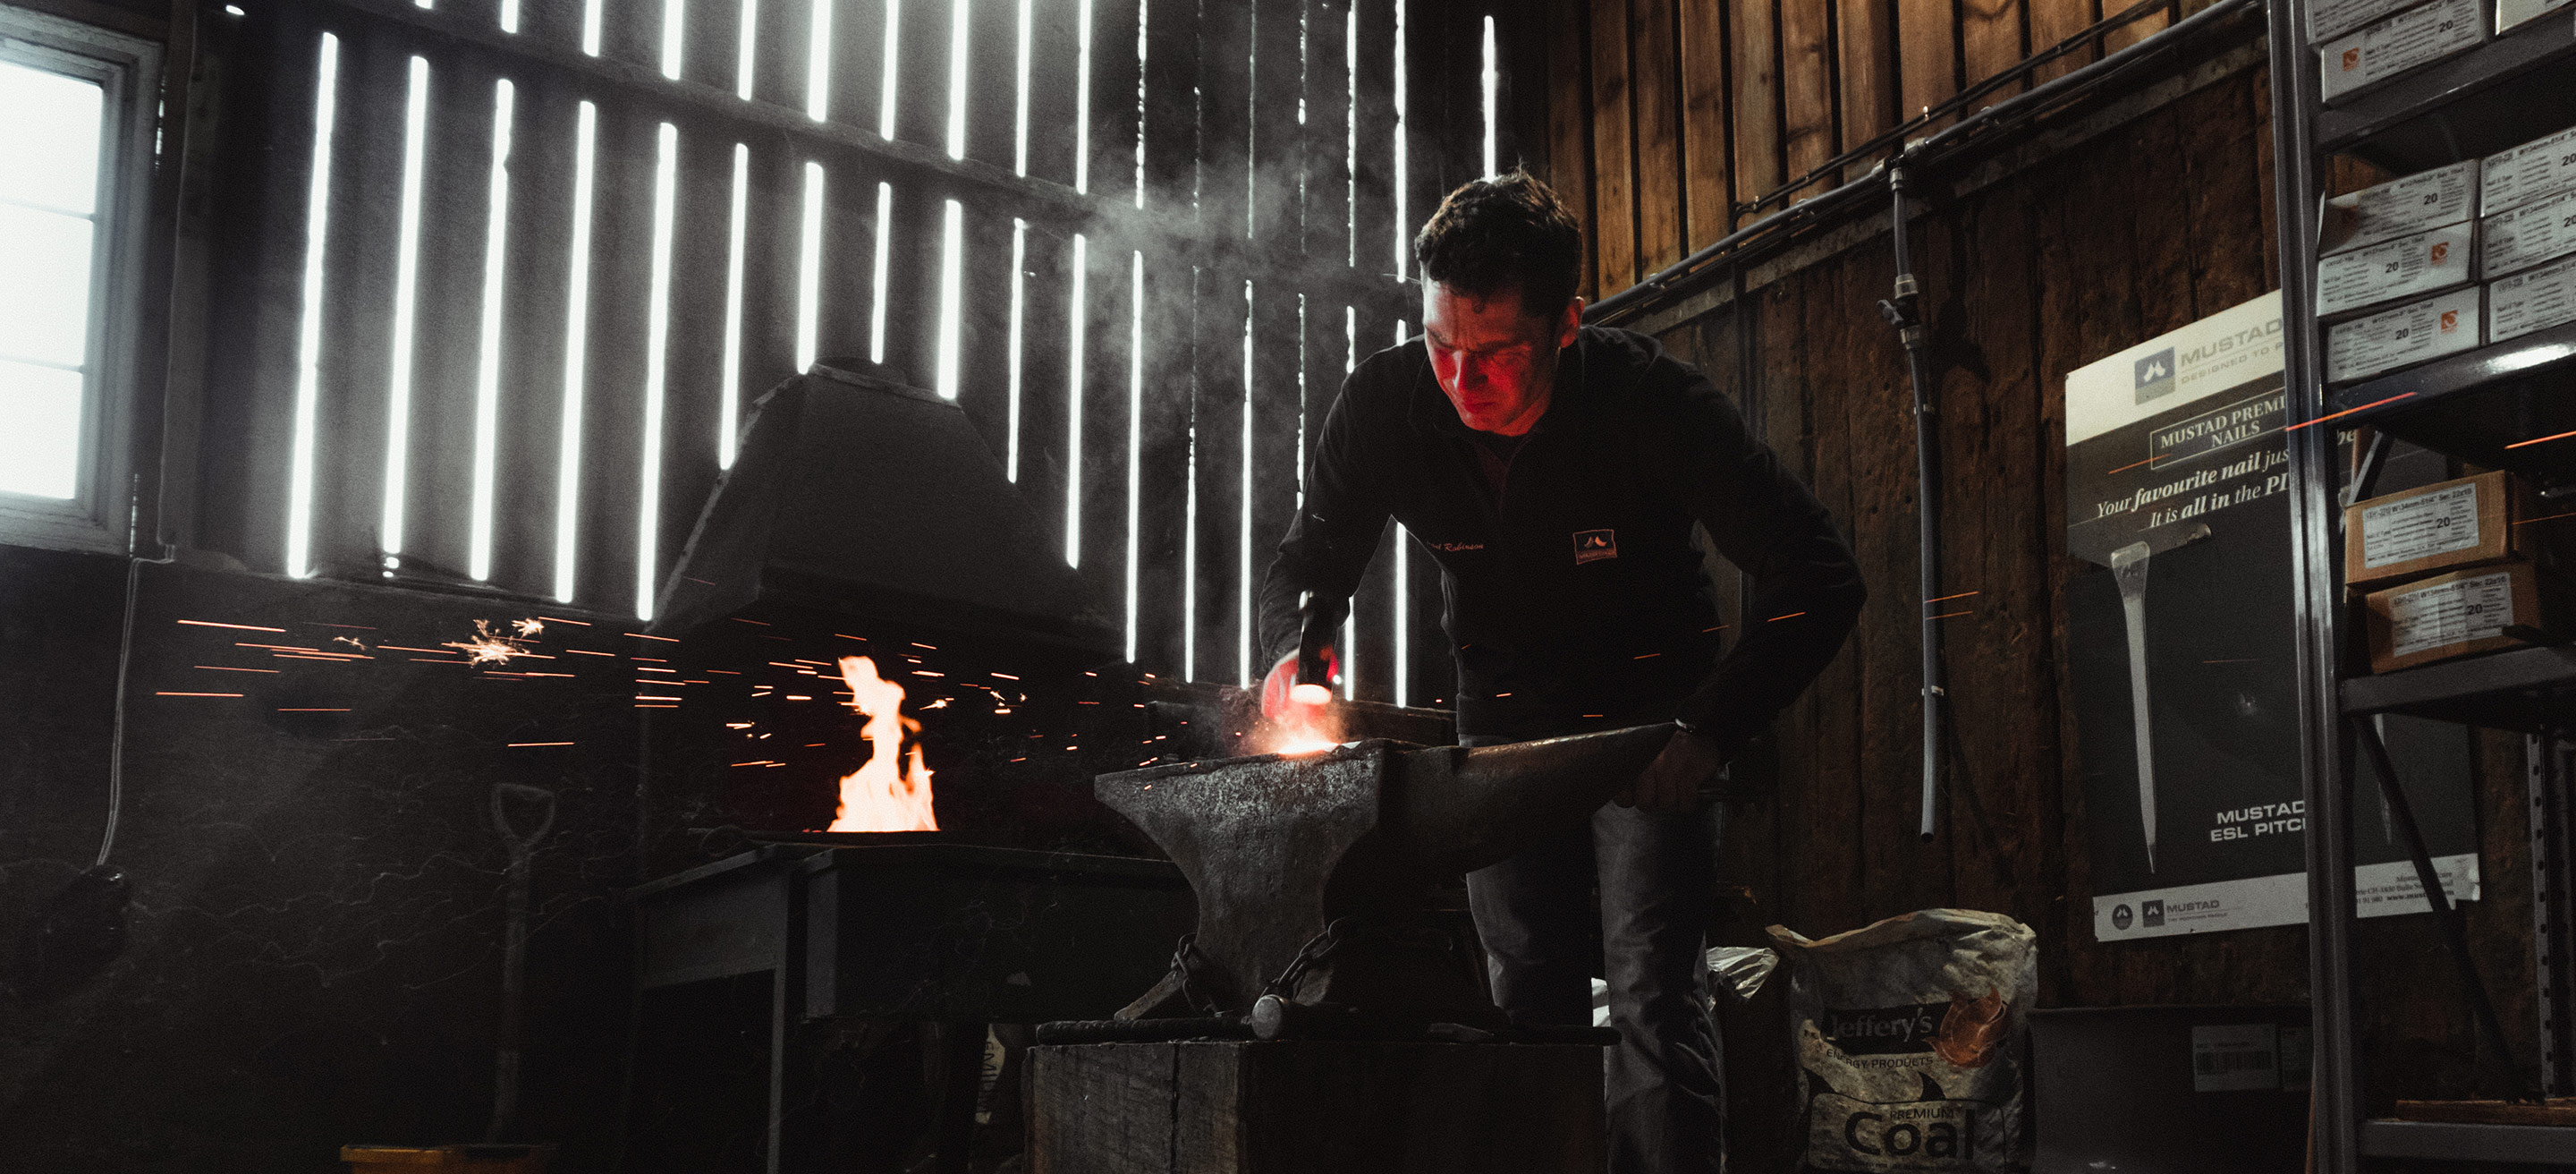 A farrier forging in his workshop